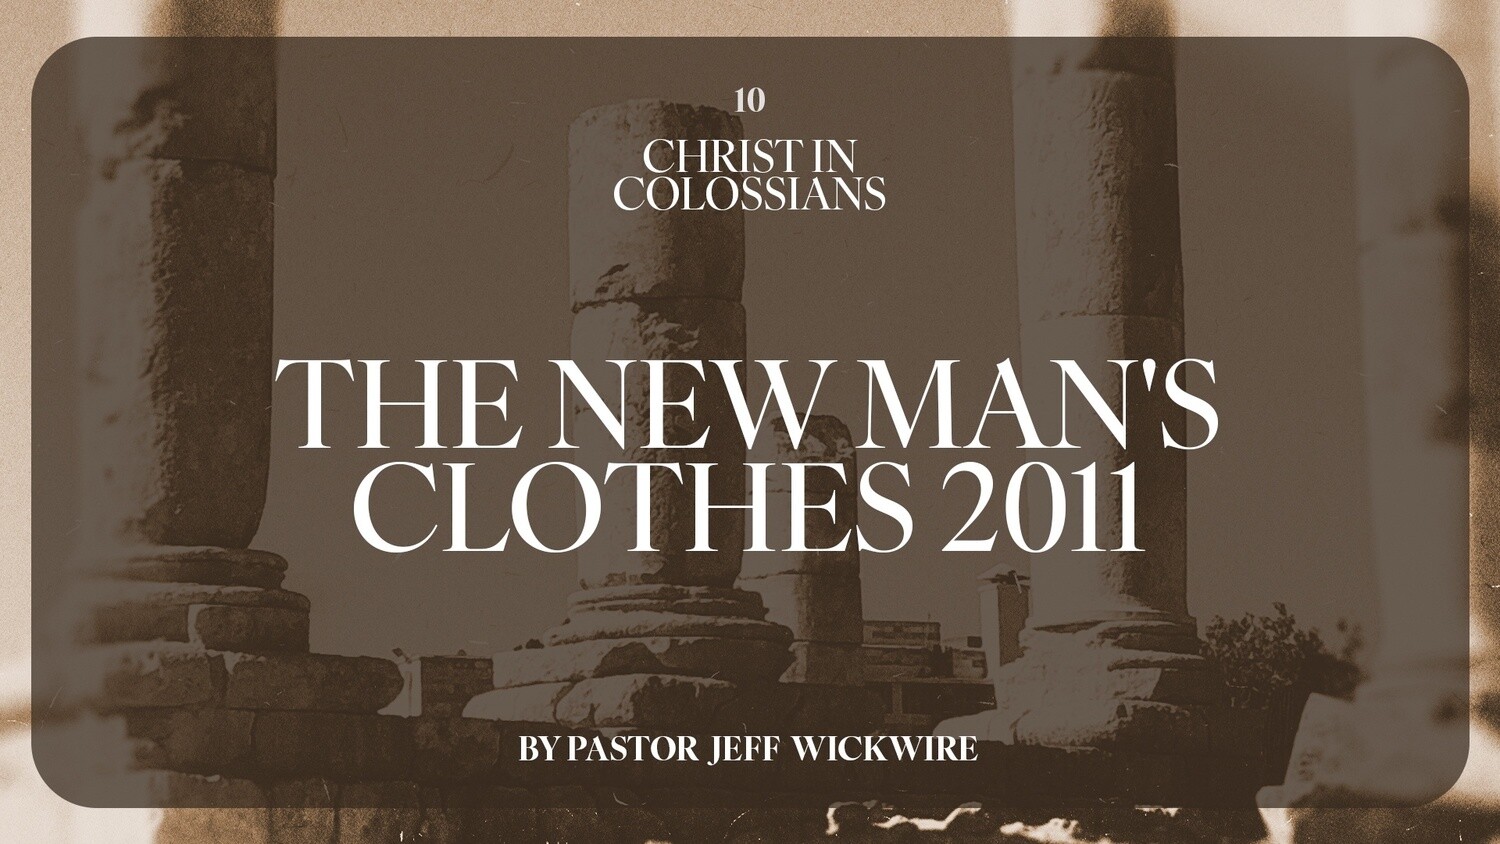 10 - The New Man's Clothes 2011 By Pastor Jeff Wickwire